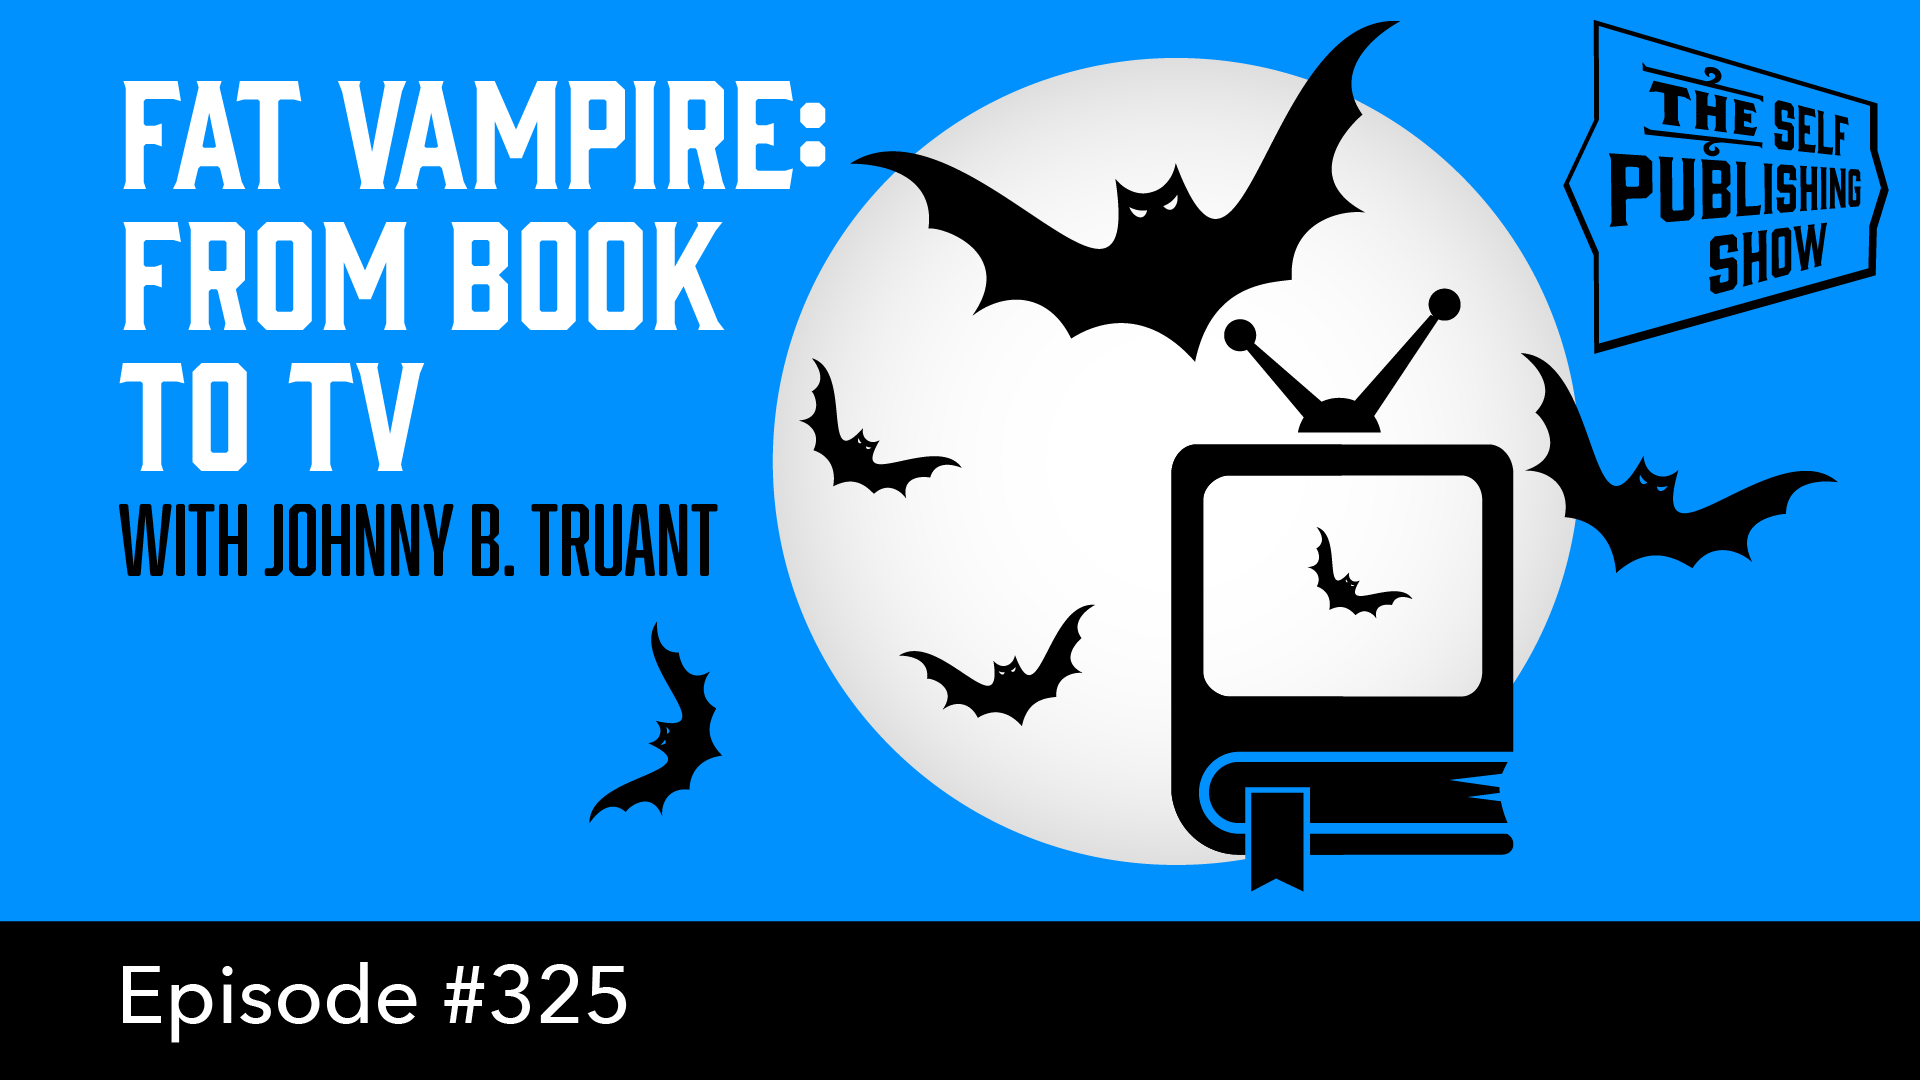 Fat Vampire: From Book to TV - with Johnny B. Truant iTunes Summary (JD): Johnny B. Truant discusses Sterling & Stone, writing over 100 books, and his upcoming TV adaptation.